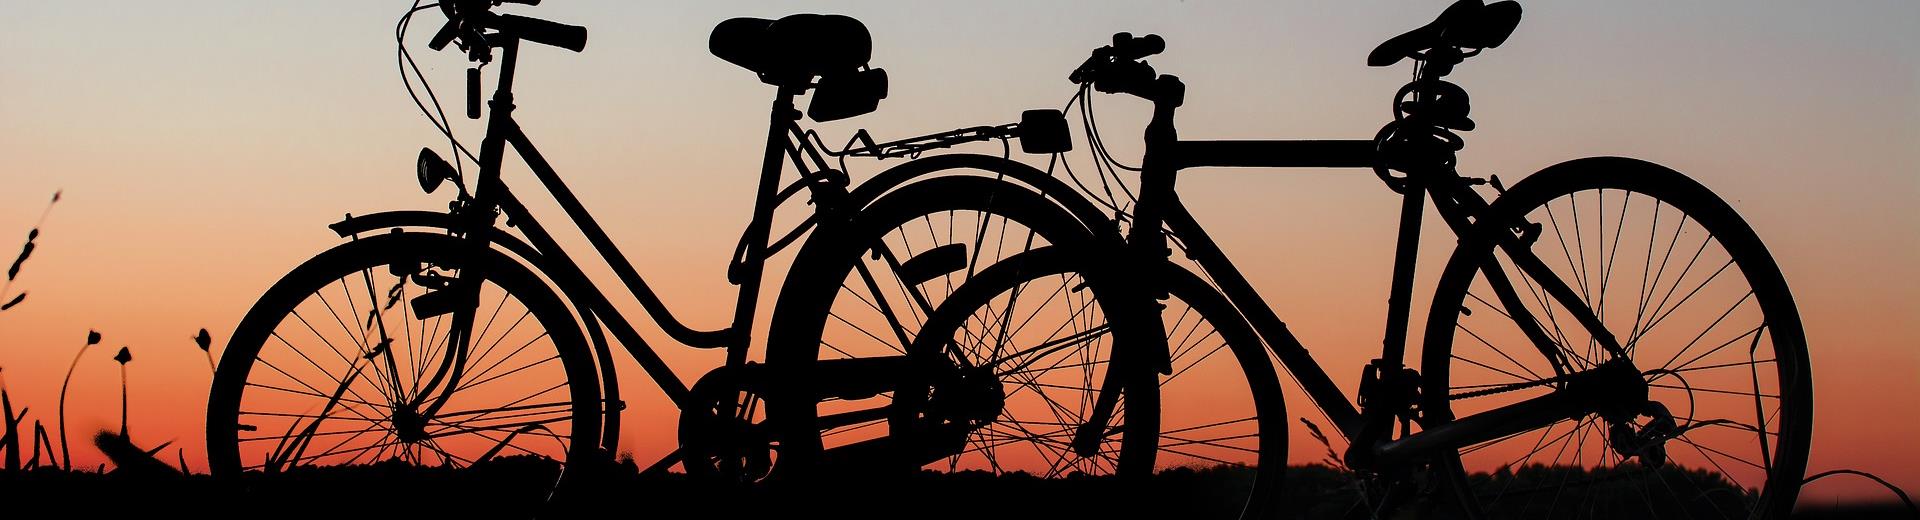 Best Western Hotel Biri, Padova 4 star, has a convenient city bike rental: find out all the most interesting itineraries in the area!